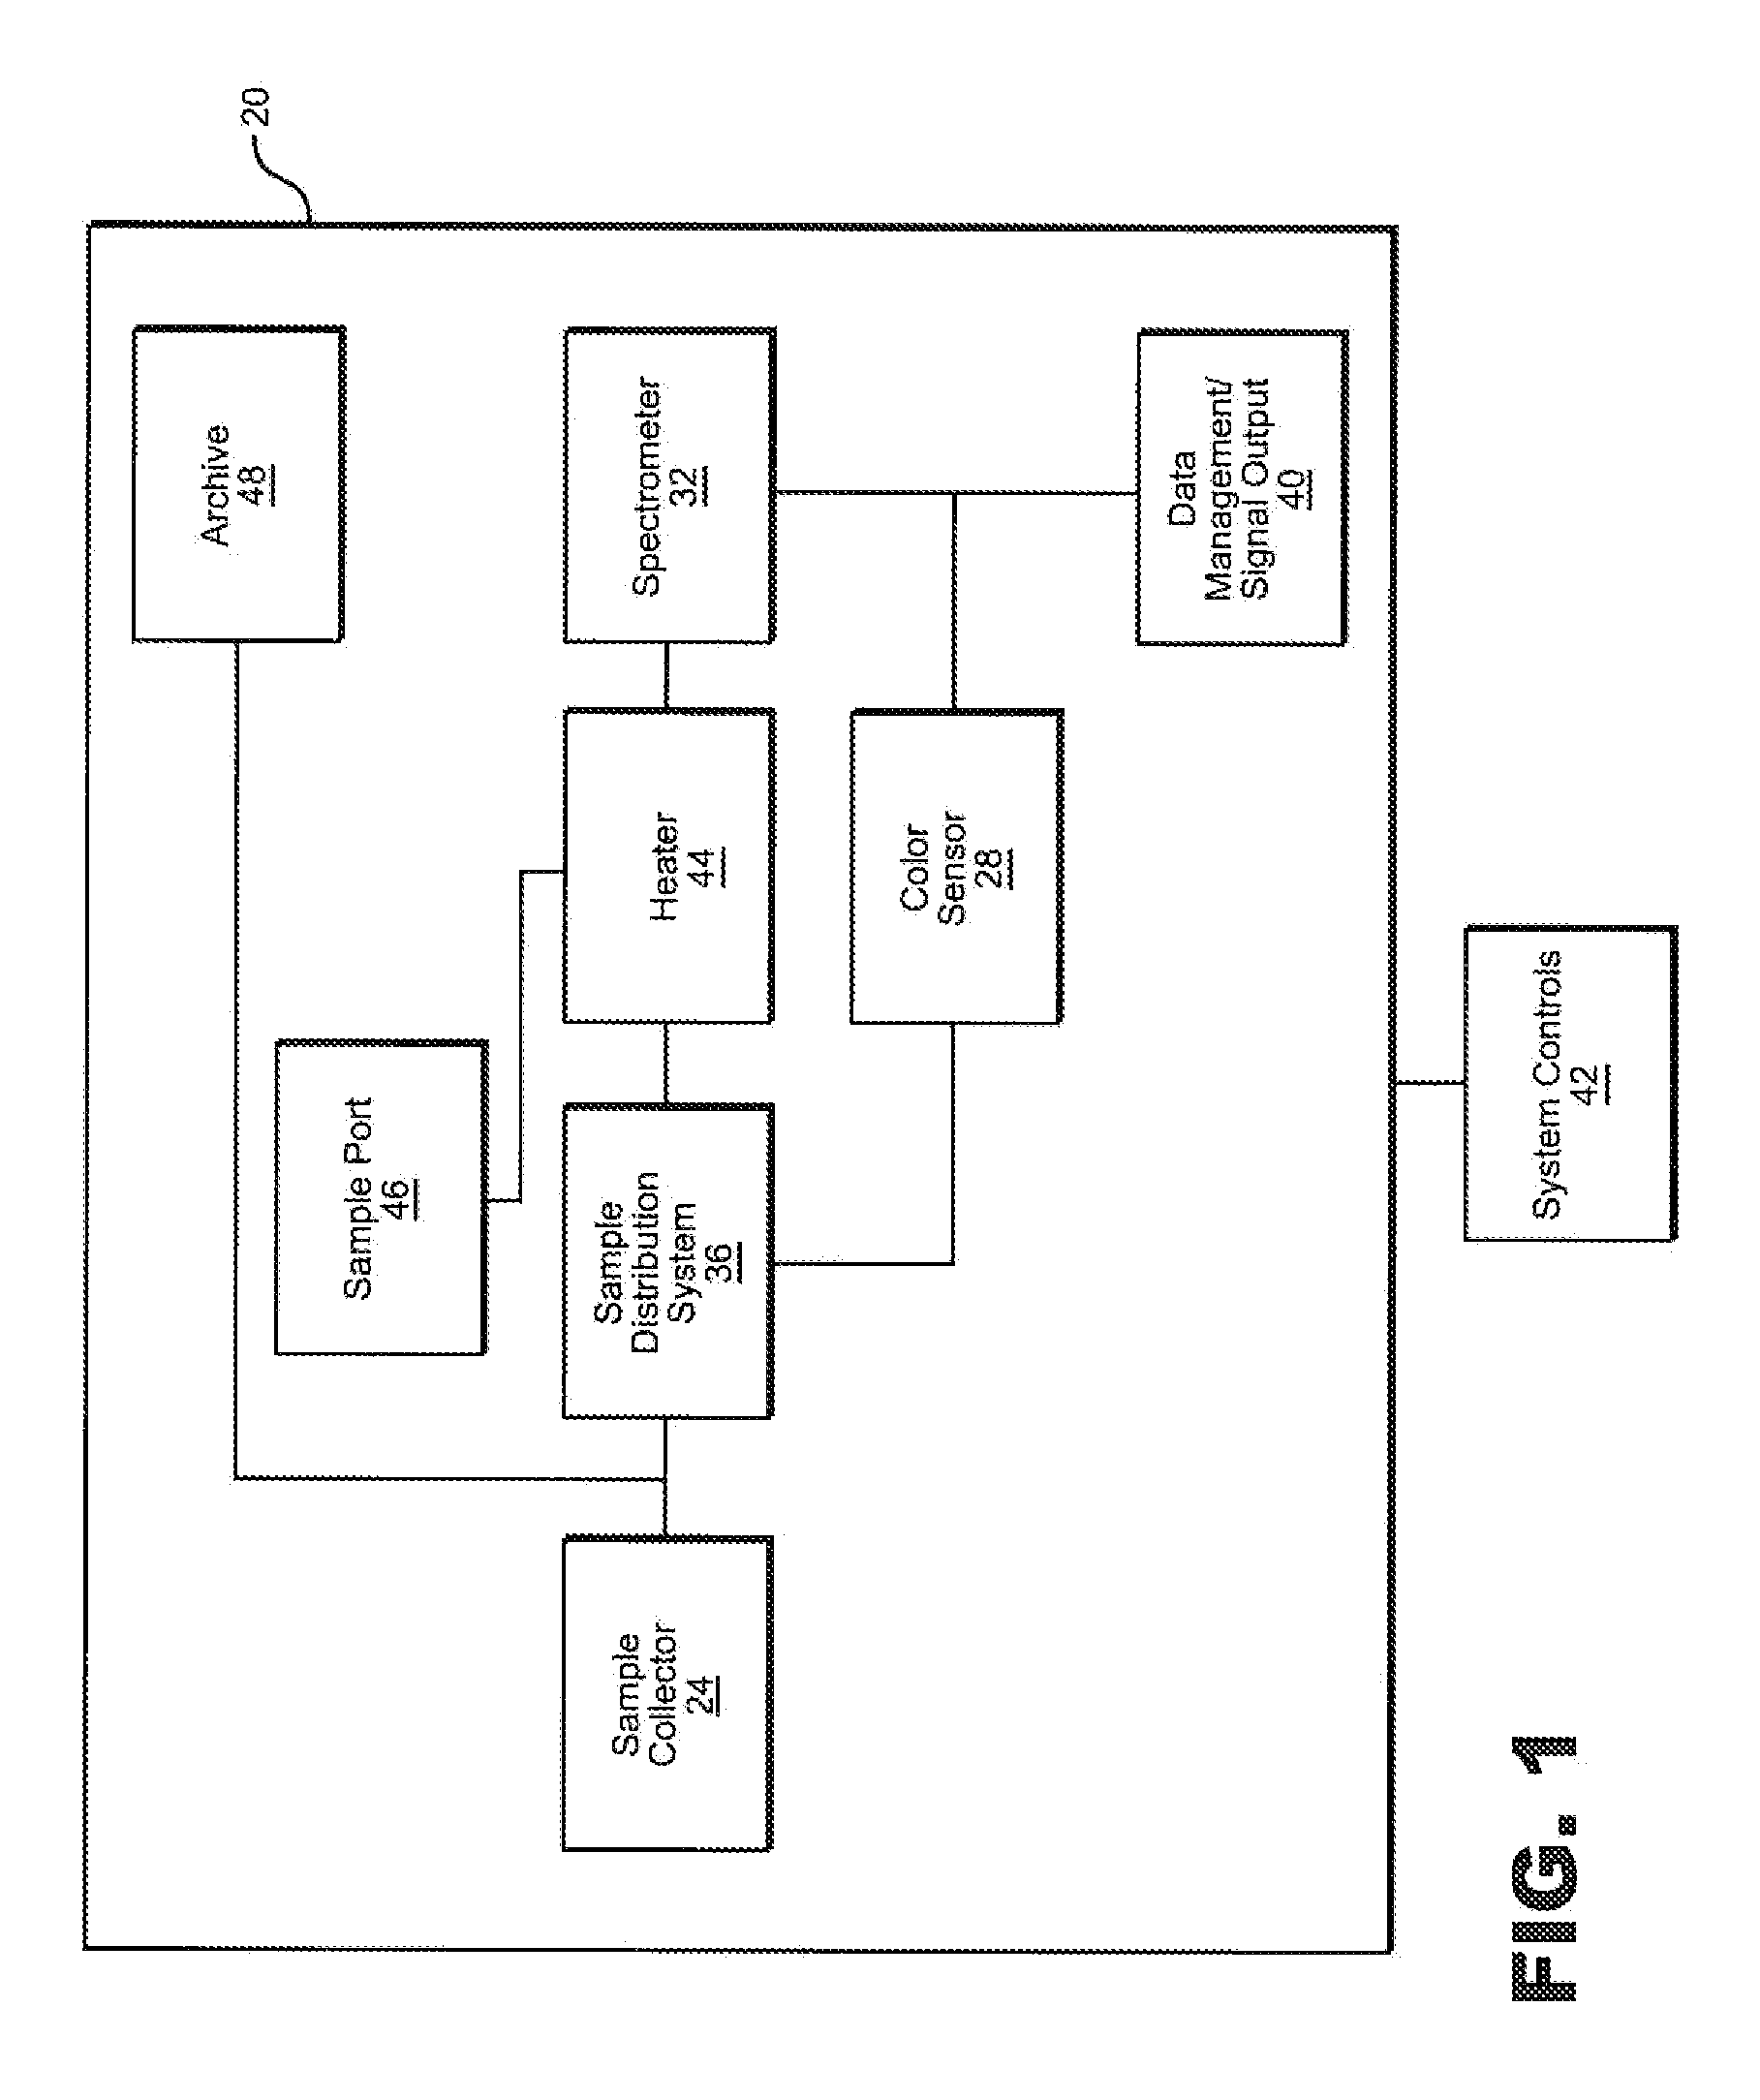 Toxic Material Detection Apparatus and Method